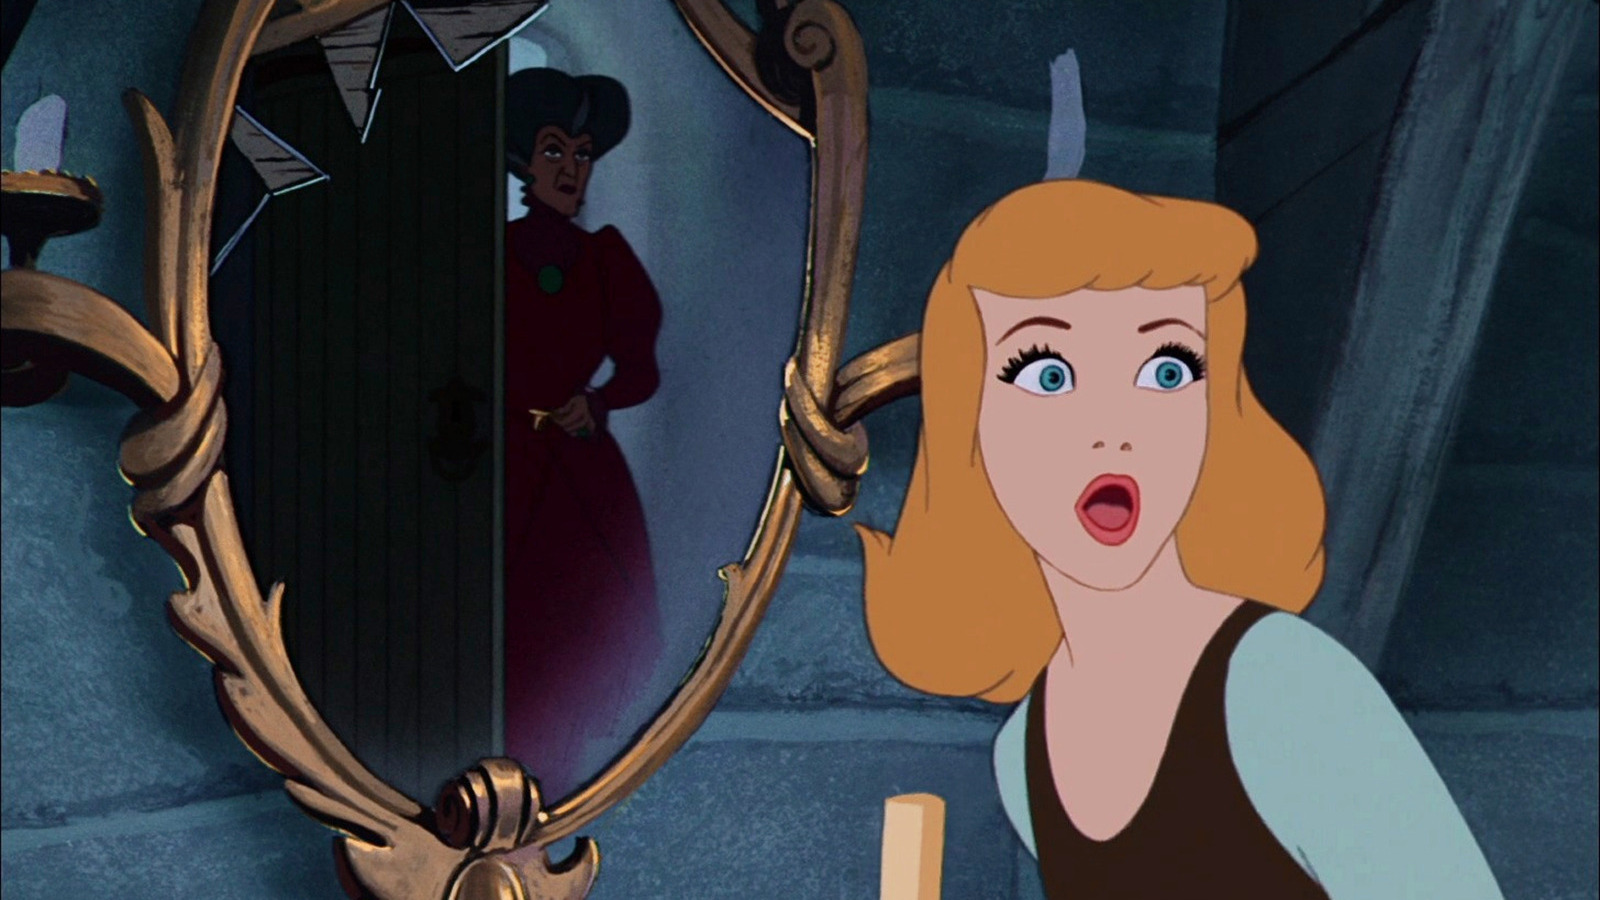 Cinderella is the latest children’s story to get the horror treatment